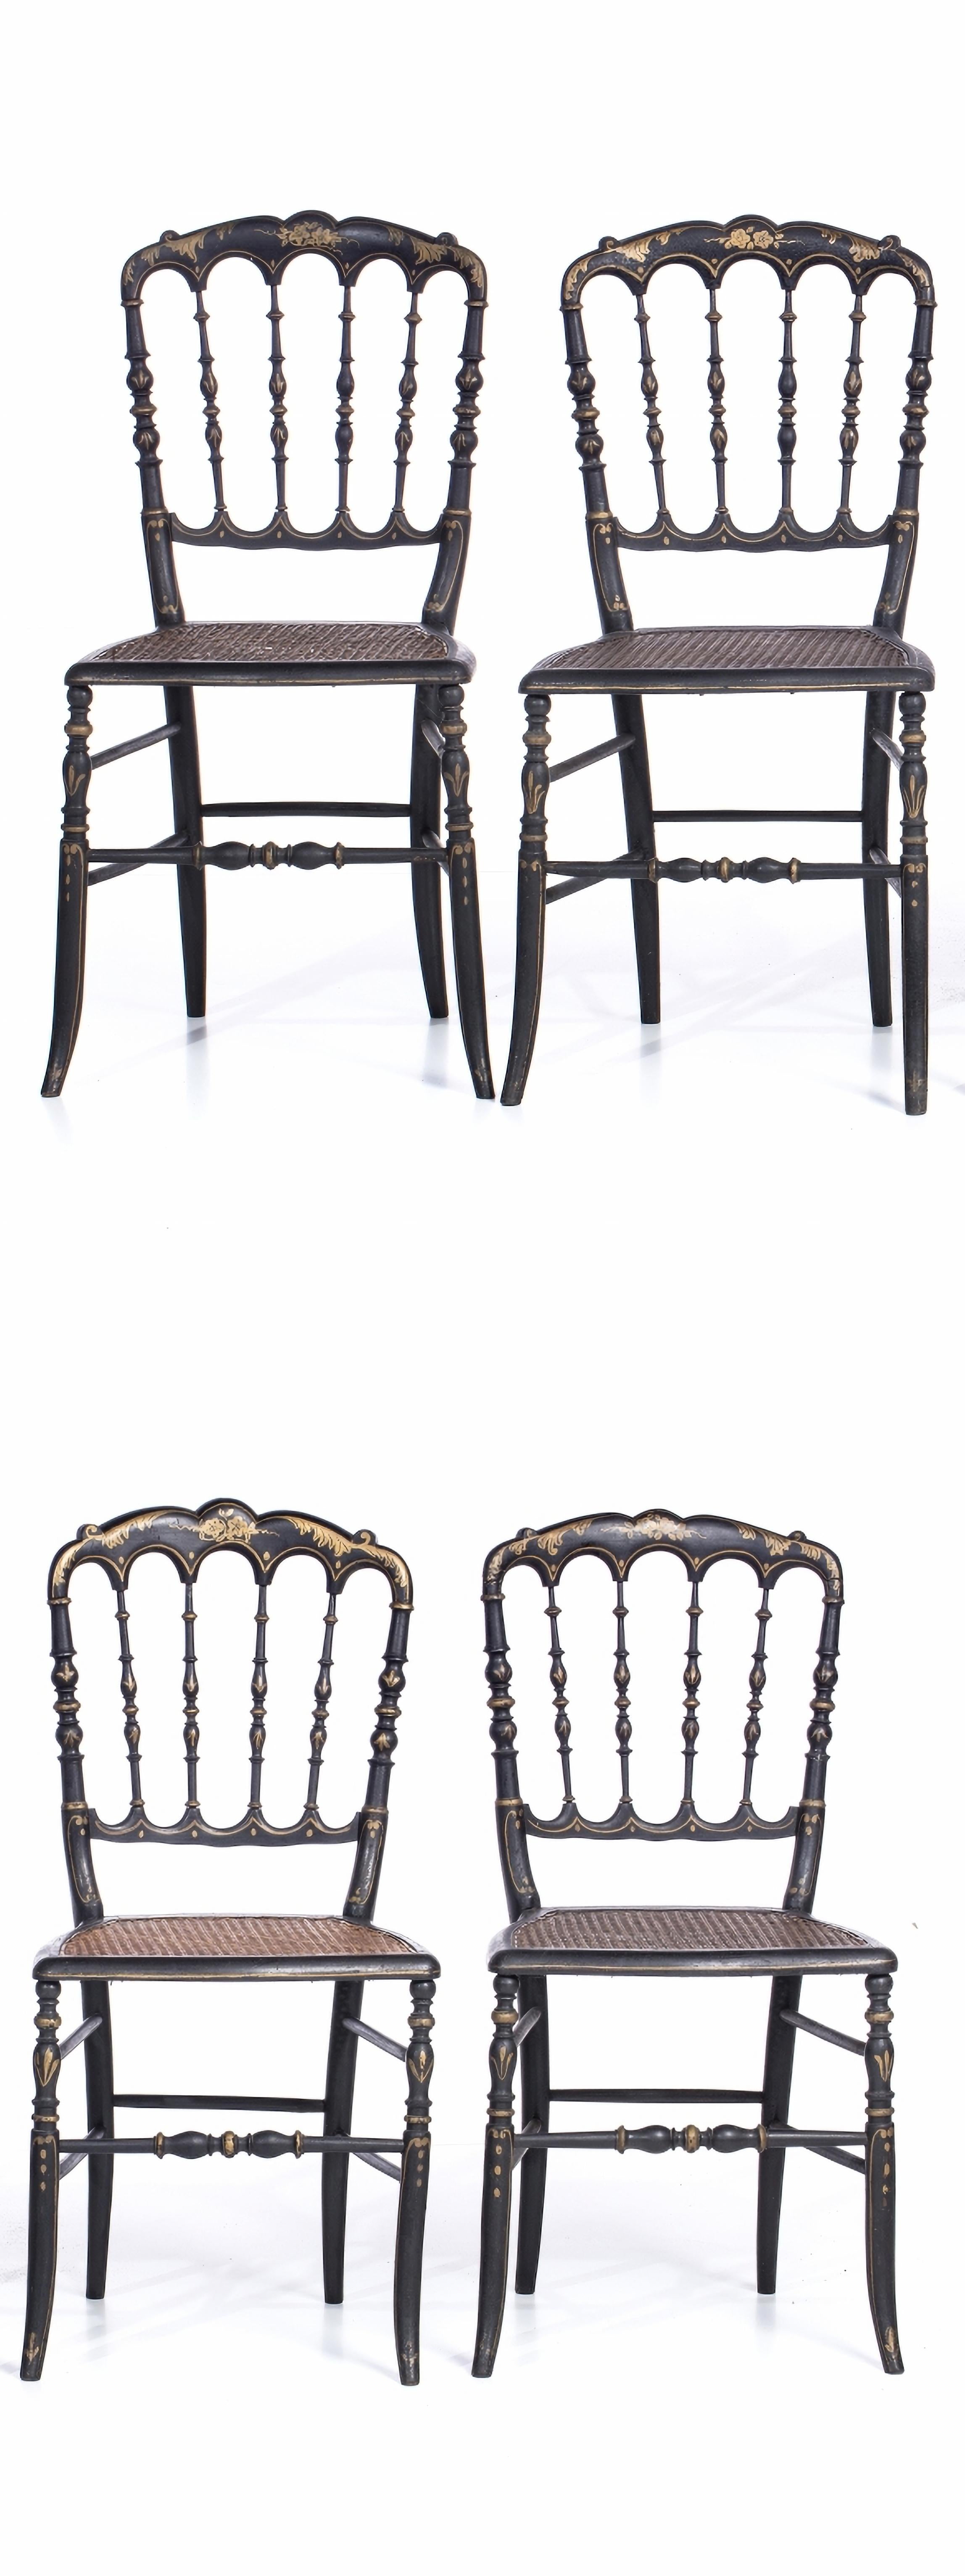 Hand-Crafted Set of Two Portuguese Chairs 19th Century